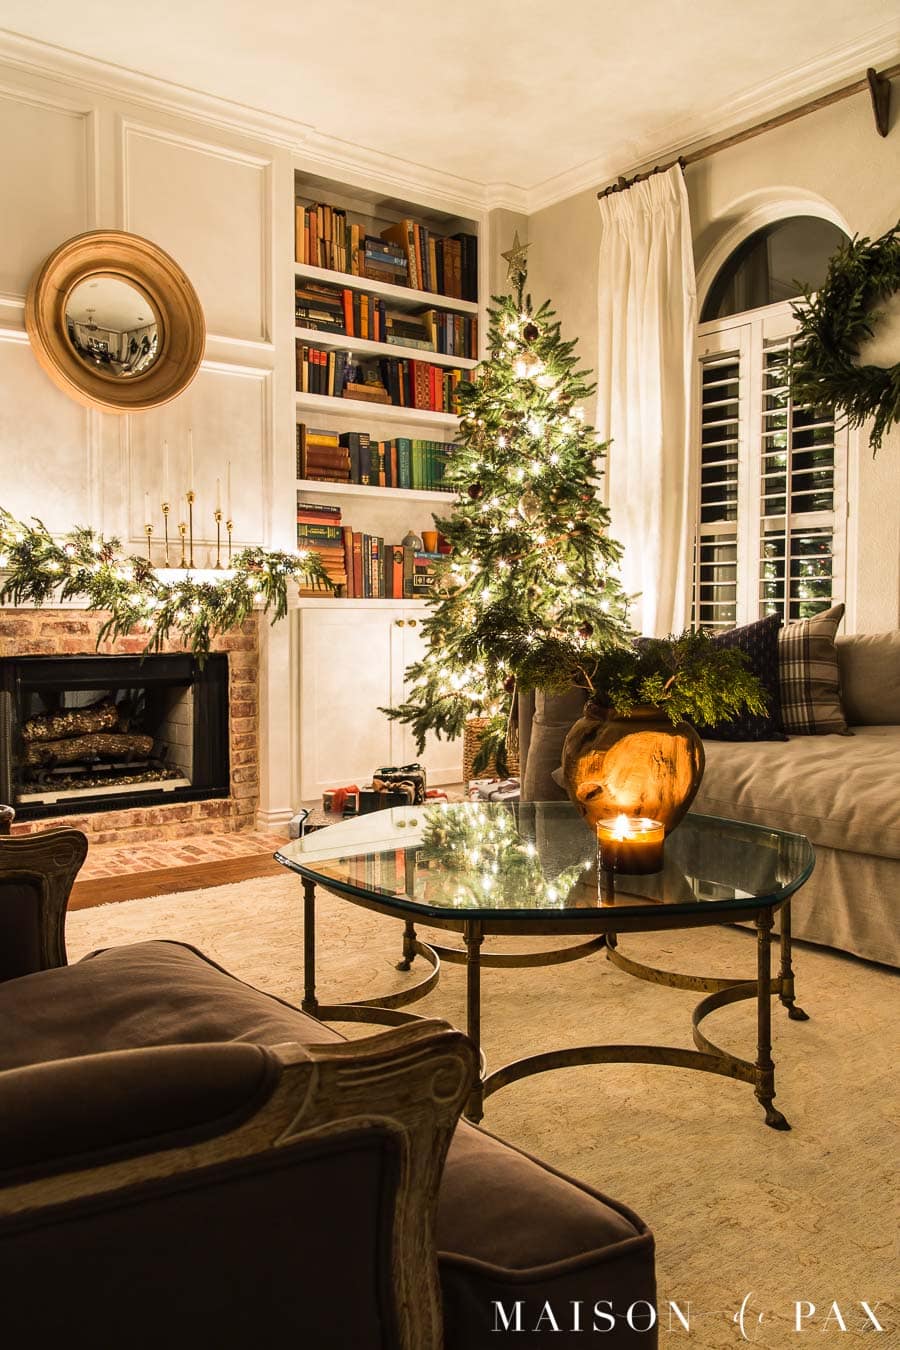 Christmas tree by fireplace with candlelight